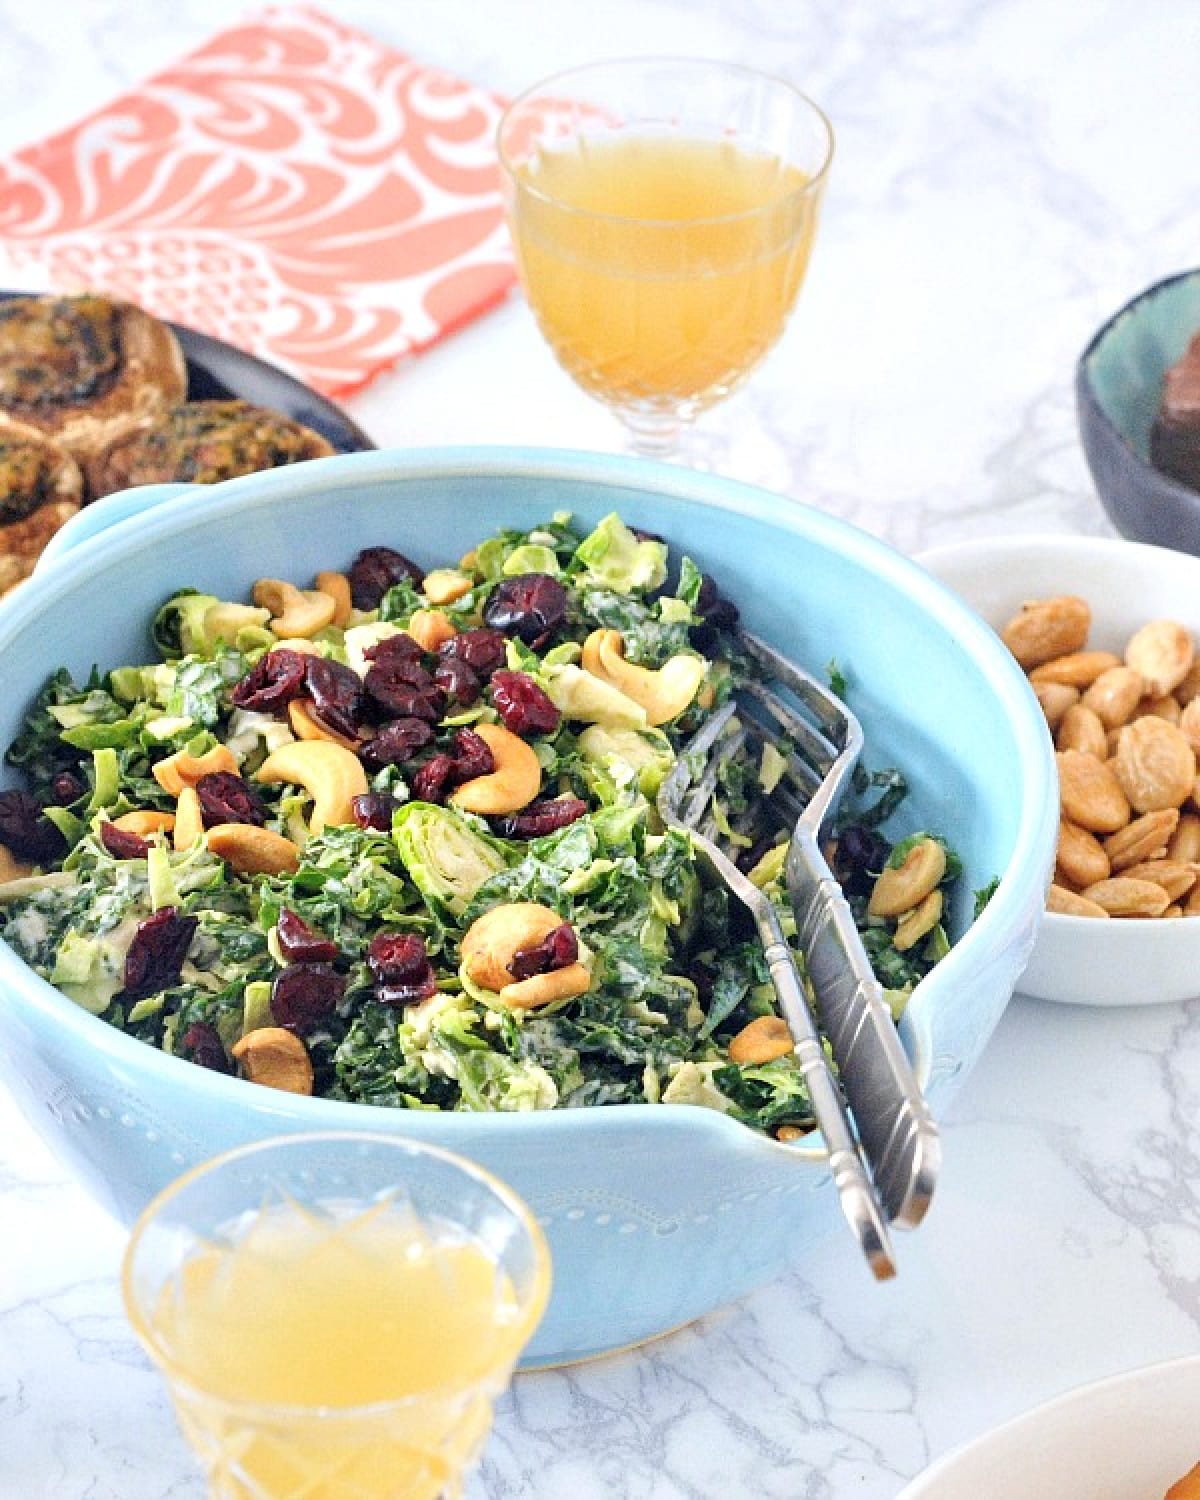 Lemon brussels and kale salad with cashews and dried cranberries in a light blue bowl, with glasses of champagne, nuts, and an orange napkin.